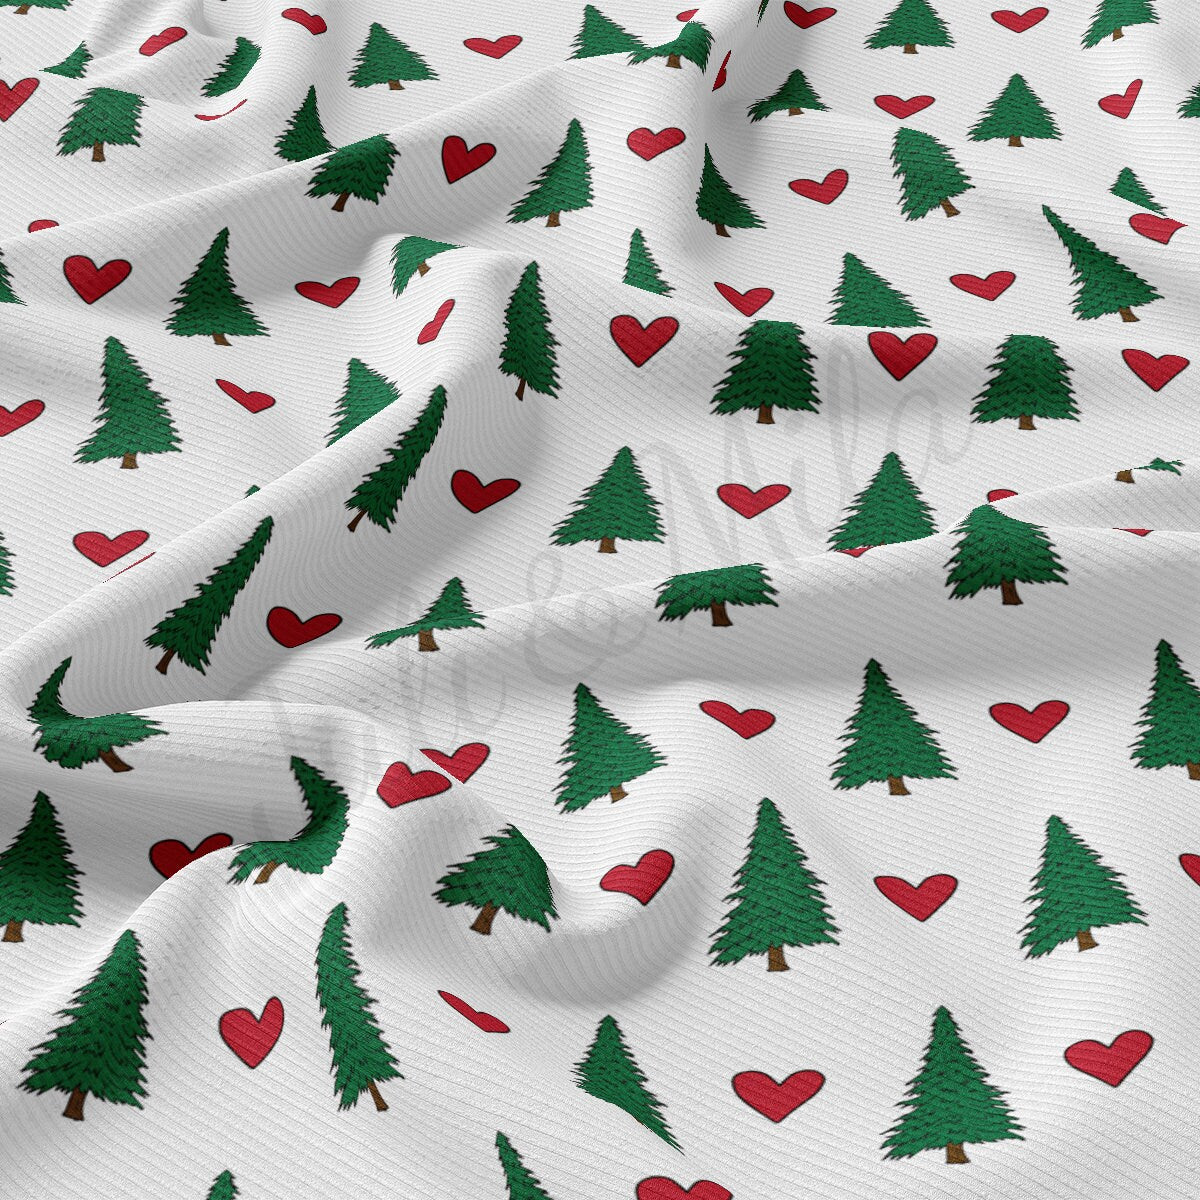 Christmas Rib Knit Fabric by the Yard Ribbed Jersey Stretchy Soft Polyester Stretch Fabric 1 Yard  RBK2169